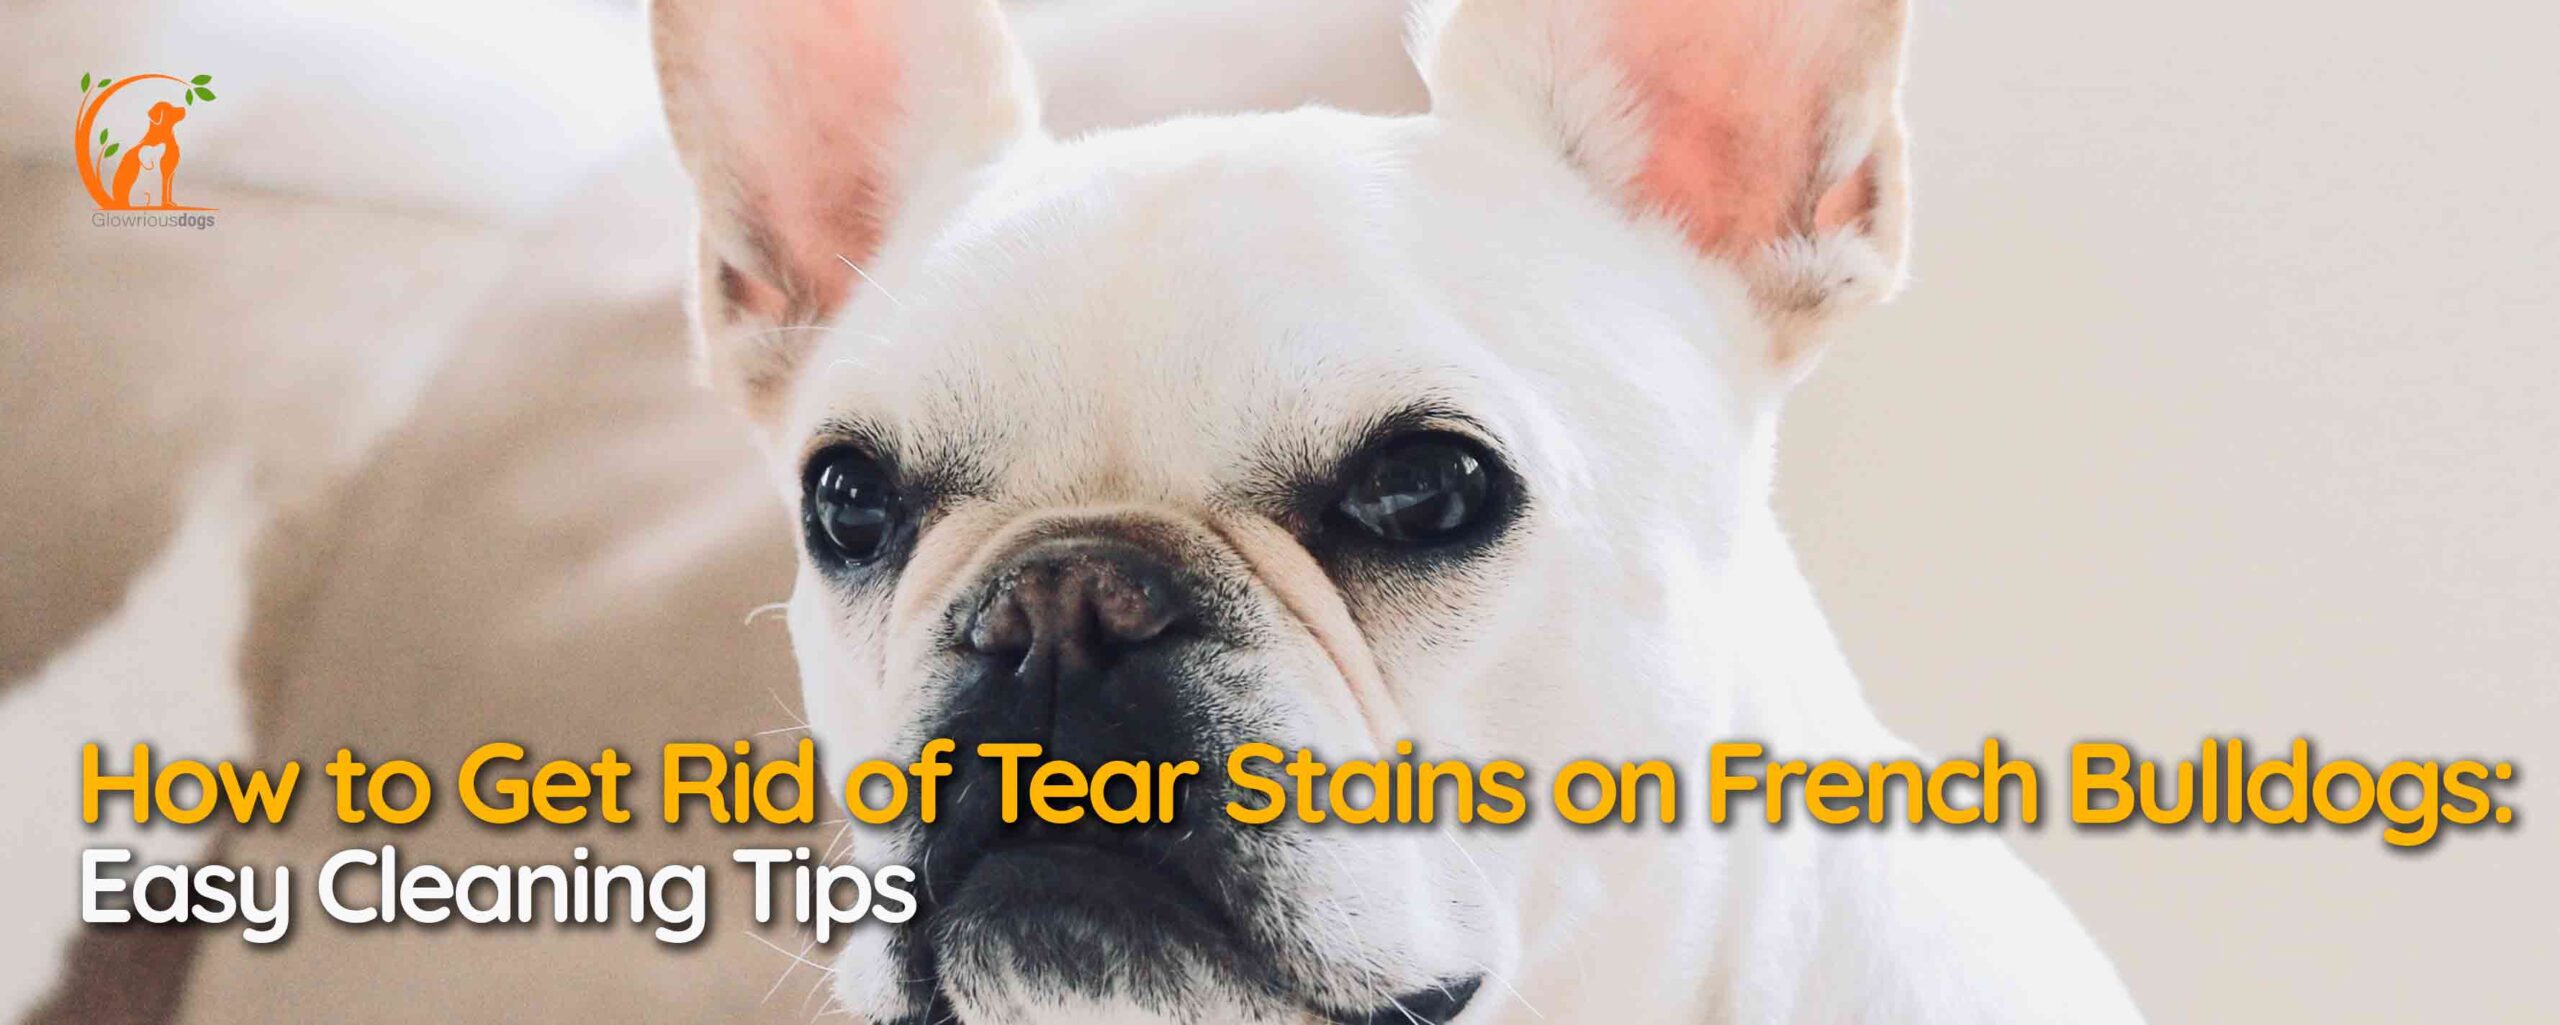 How to Get Rid of Tear Stains on French Bulldogs: Easy Cleaning Tips